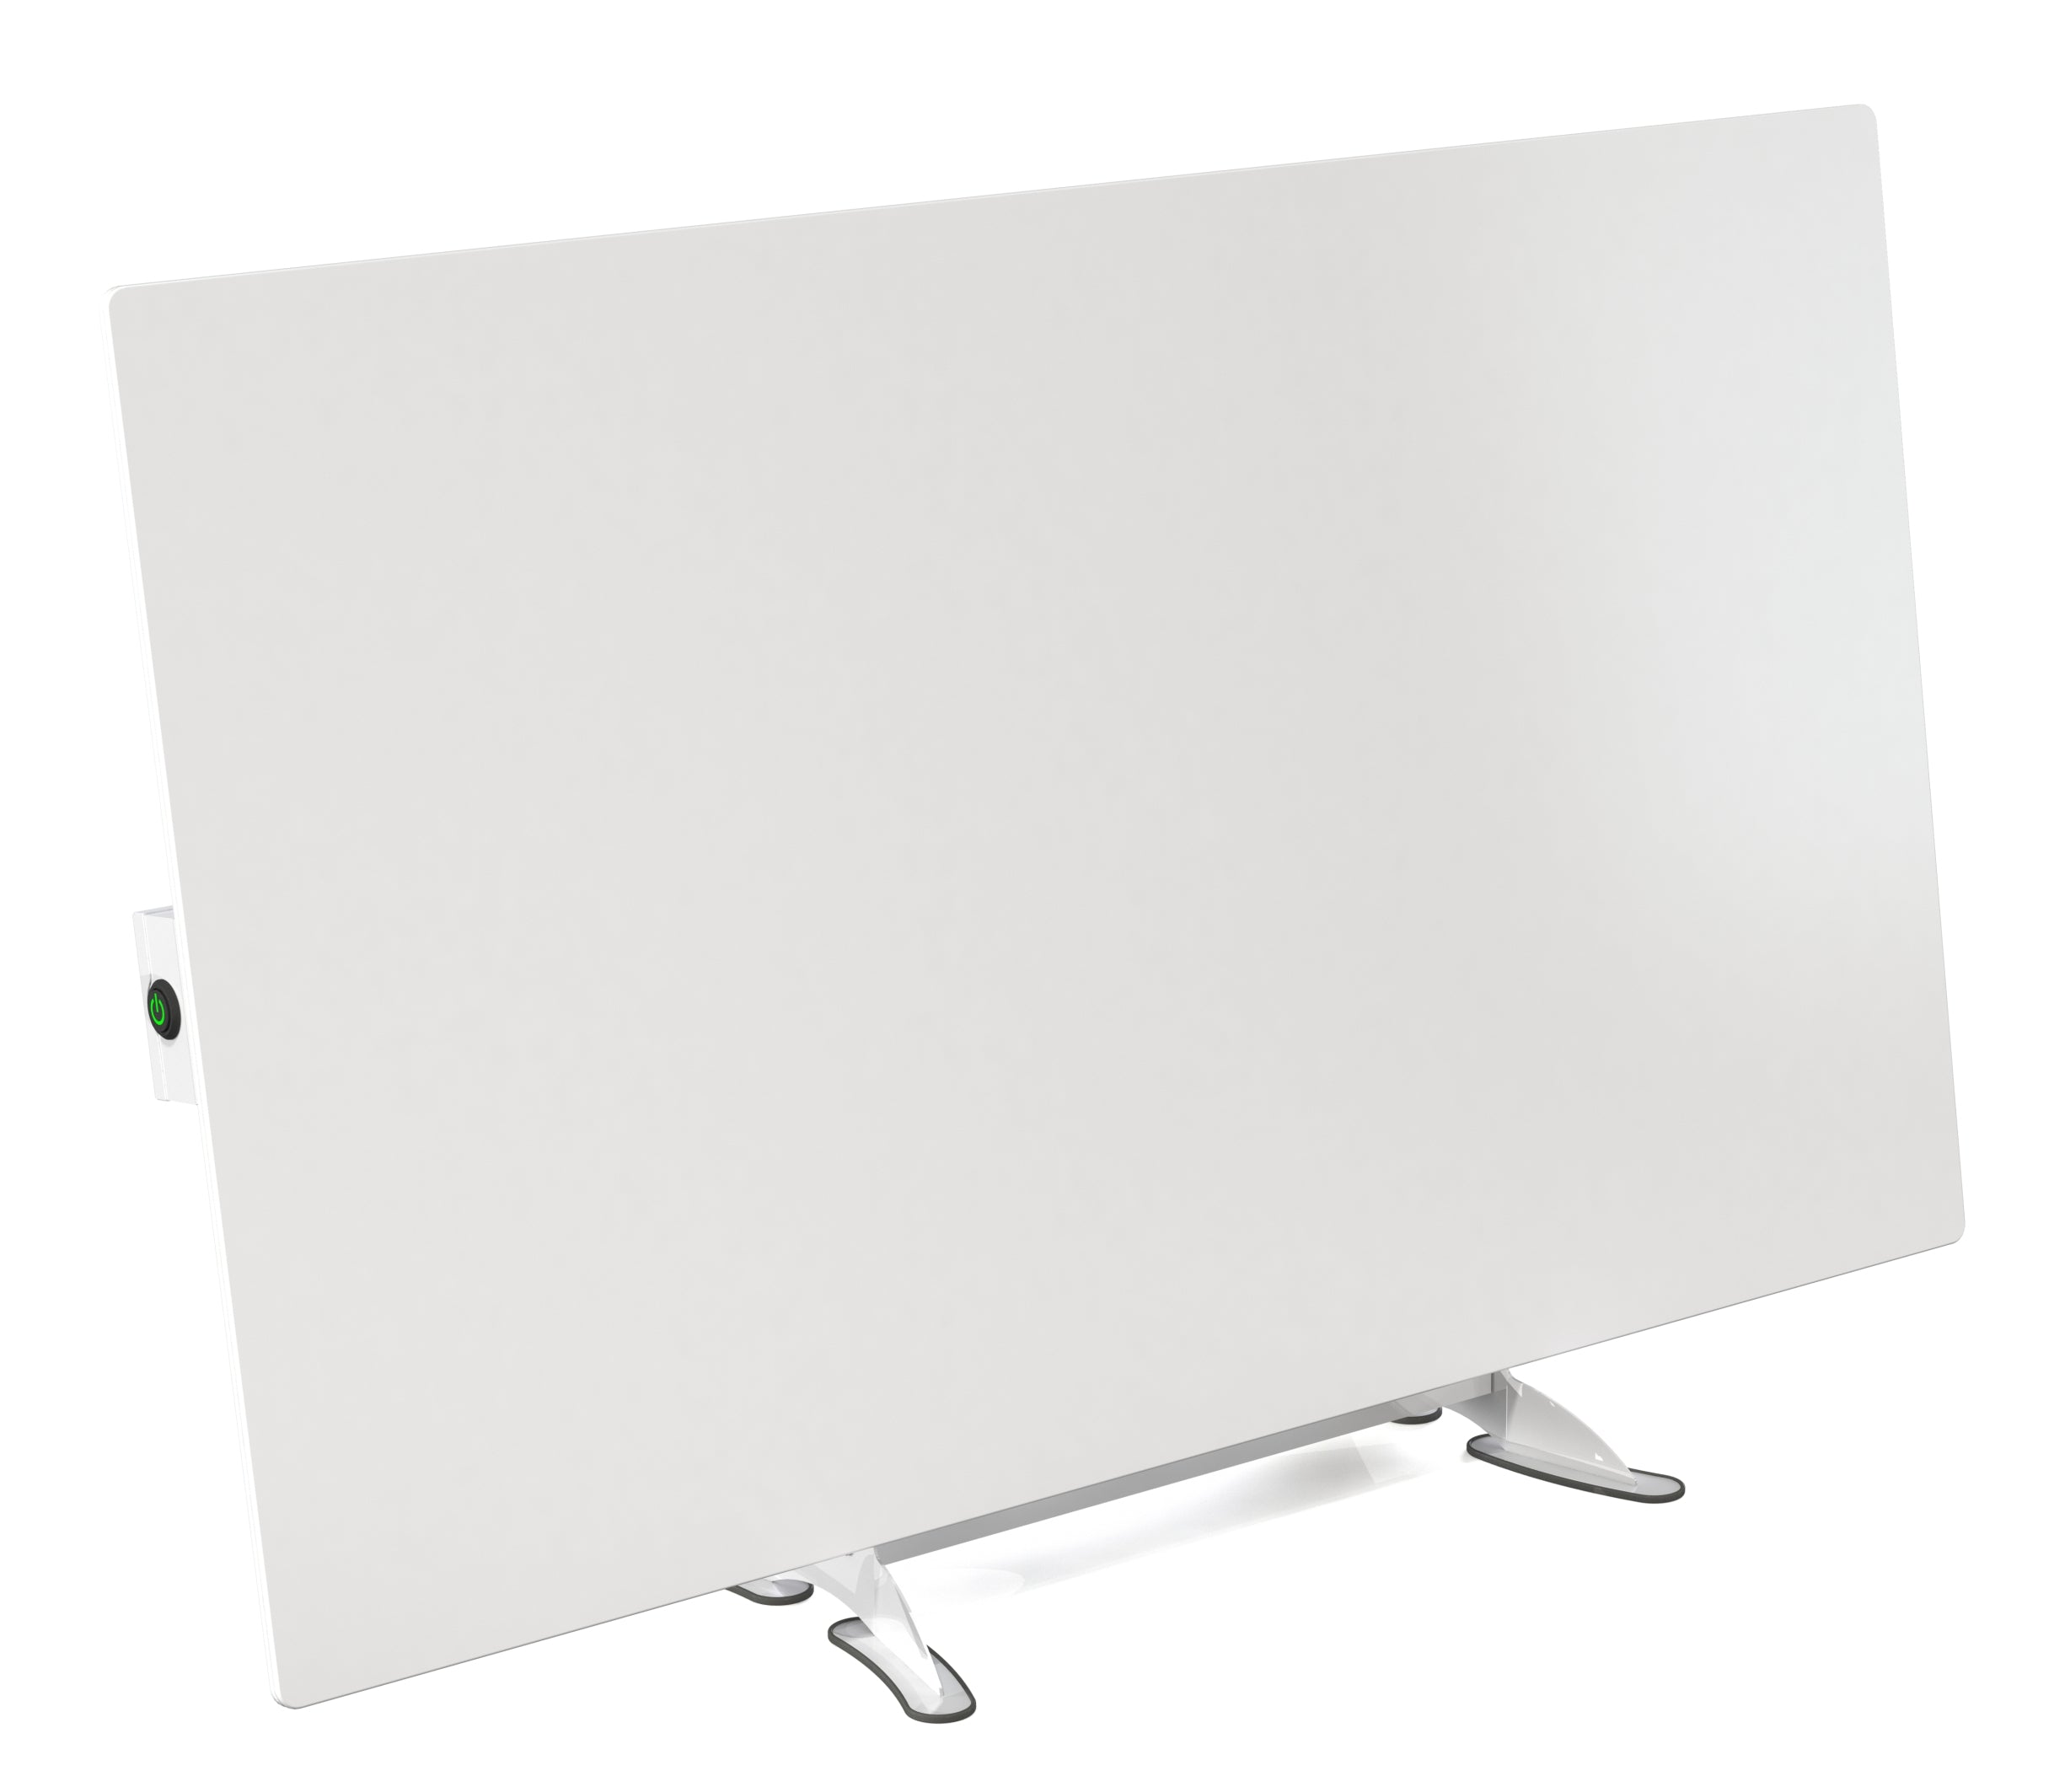 Far Infrared Heater - "Lavender Range" Smart WiFi control or ON/OFF models. Glass Smart infrared heating panels. White. 800-400Watts